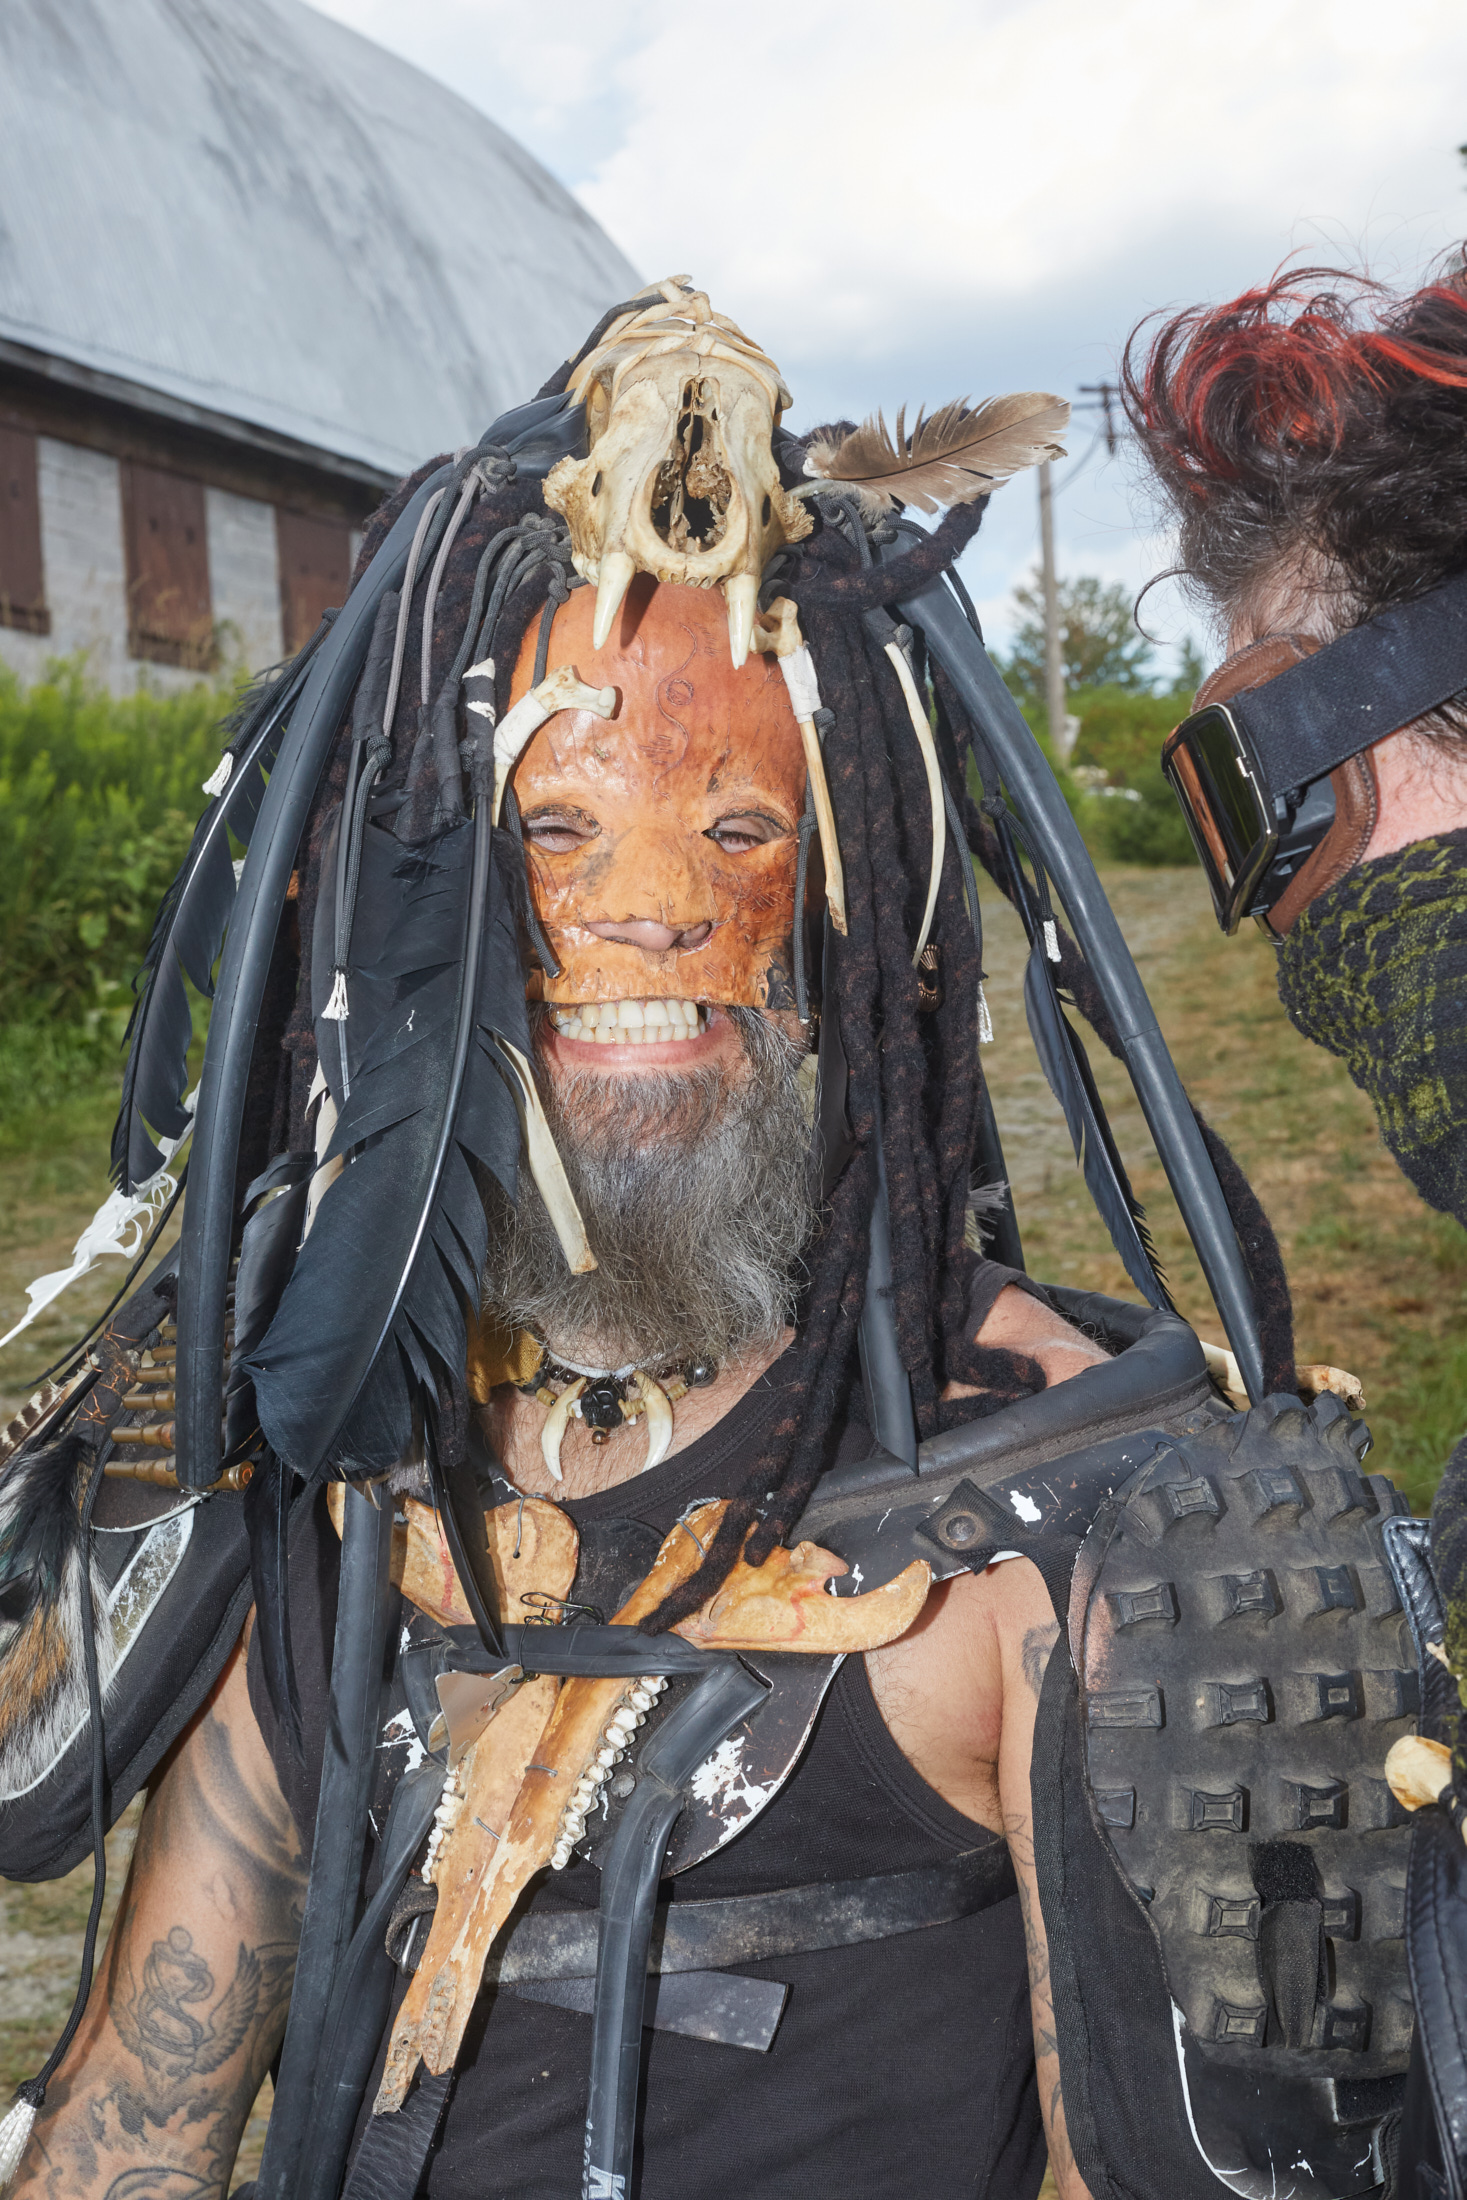 A man in a post-apocalyptic themed costume that includes a leather mask